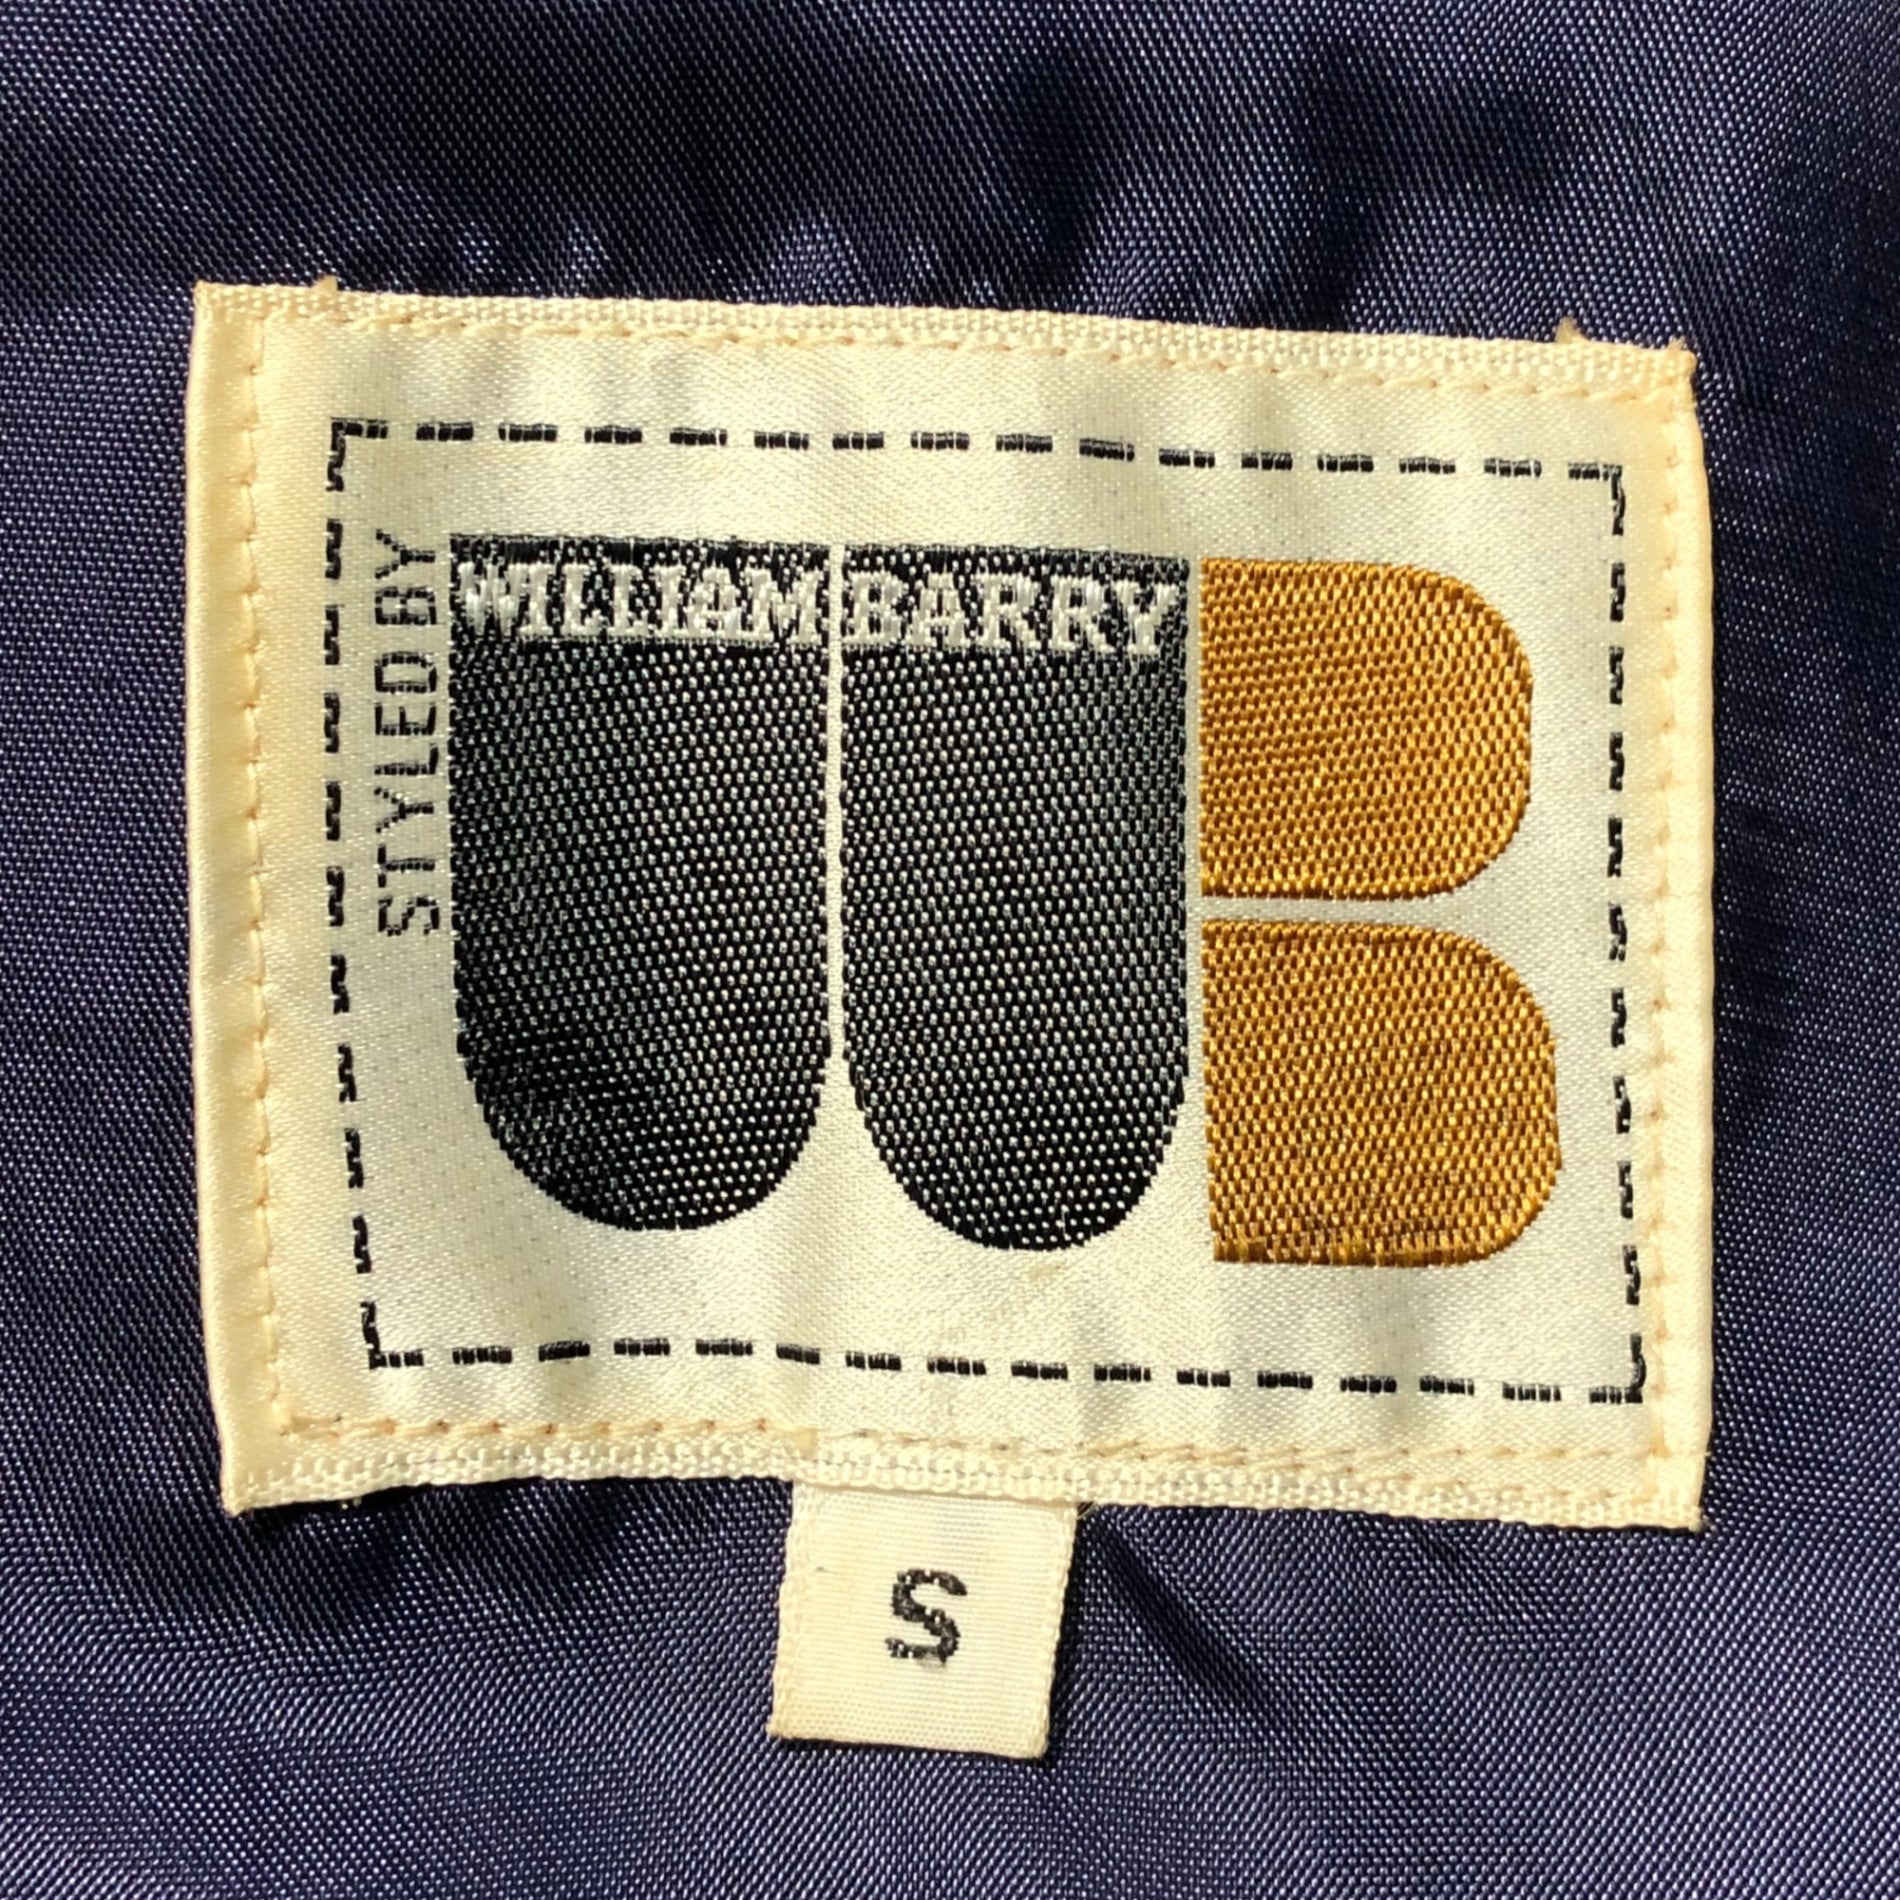 WILLIAM BARRY(ウィリアムバリー) 70's  stitched suede jacket ステッチ スウェード ジャケット S ネイビー styled by william barry 70年代 ヴィンテージ シャツ